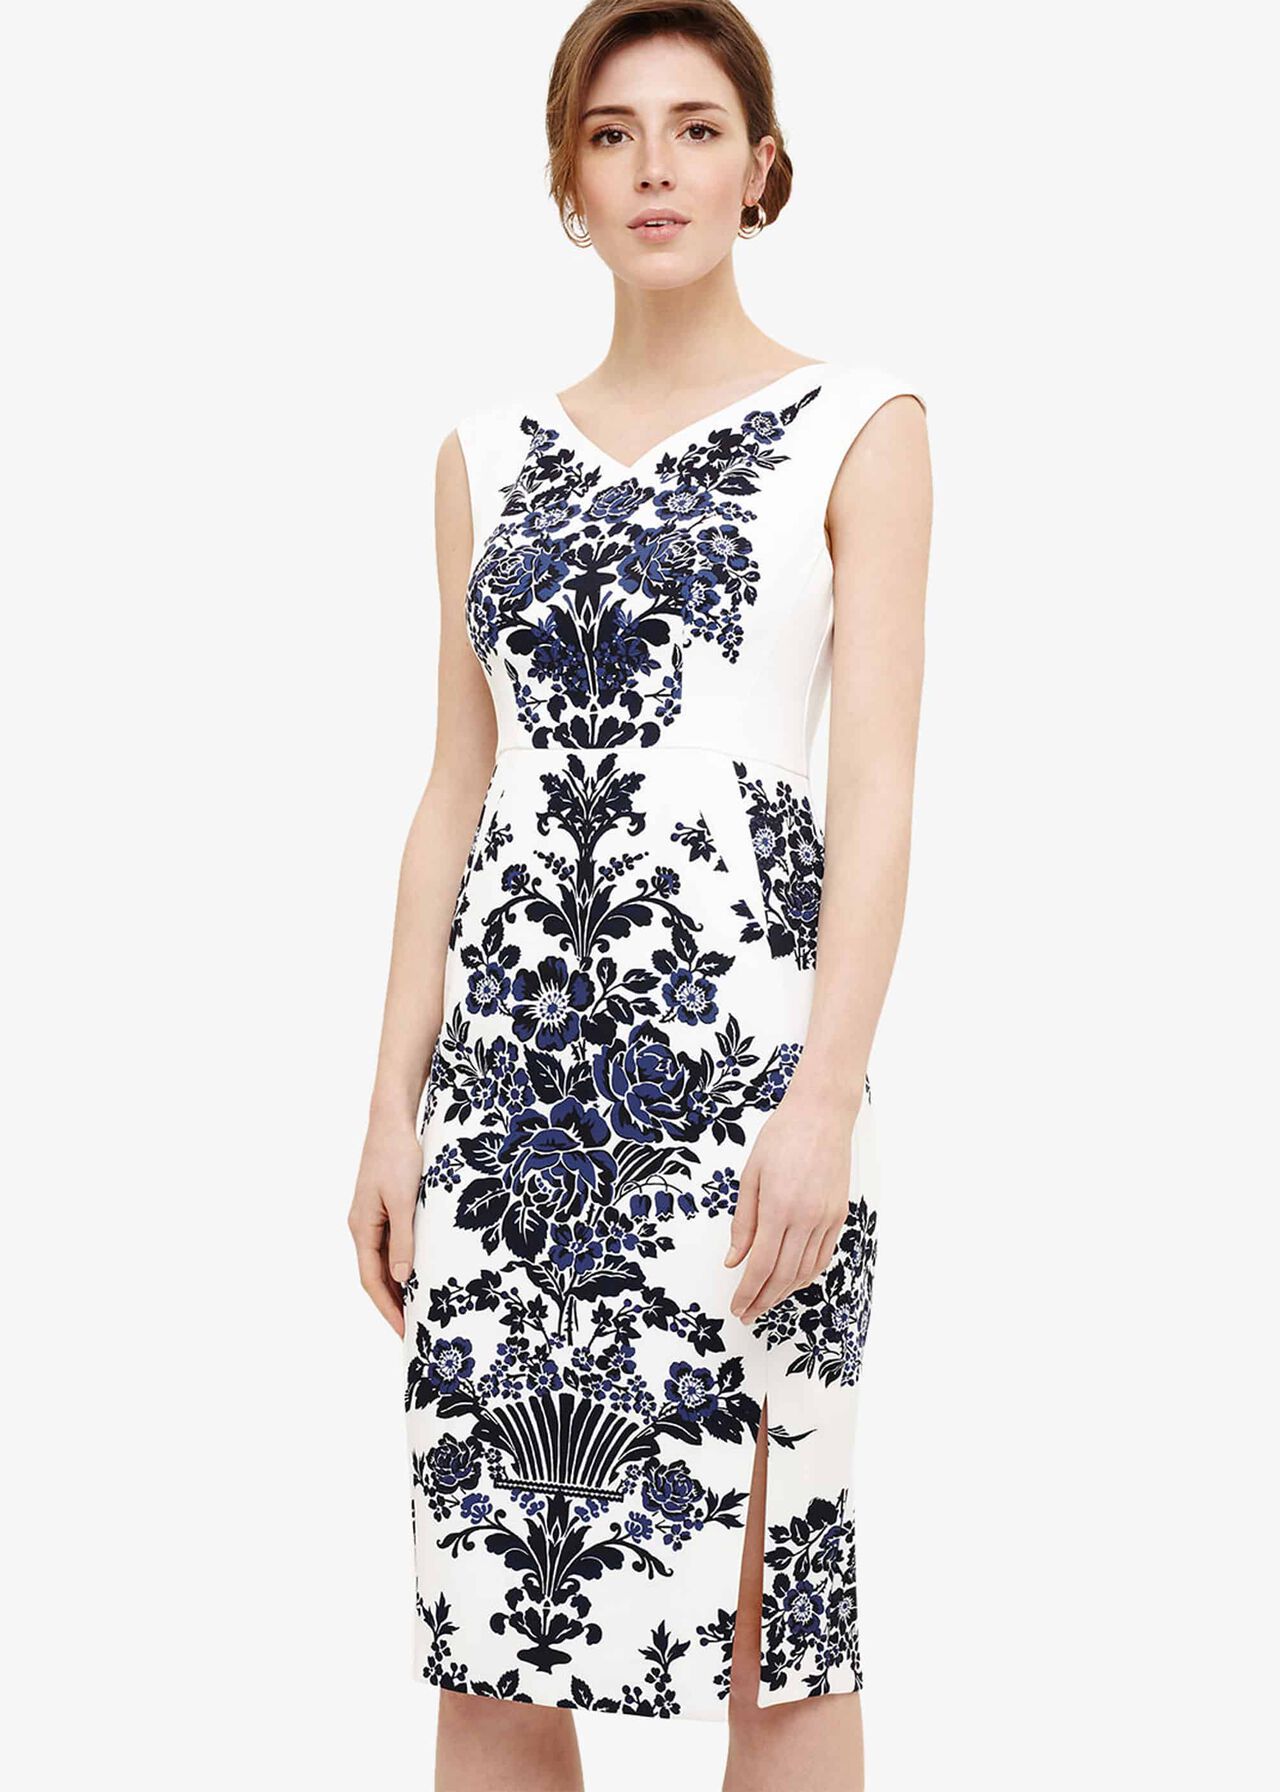 Whitney Placement Print Dress